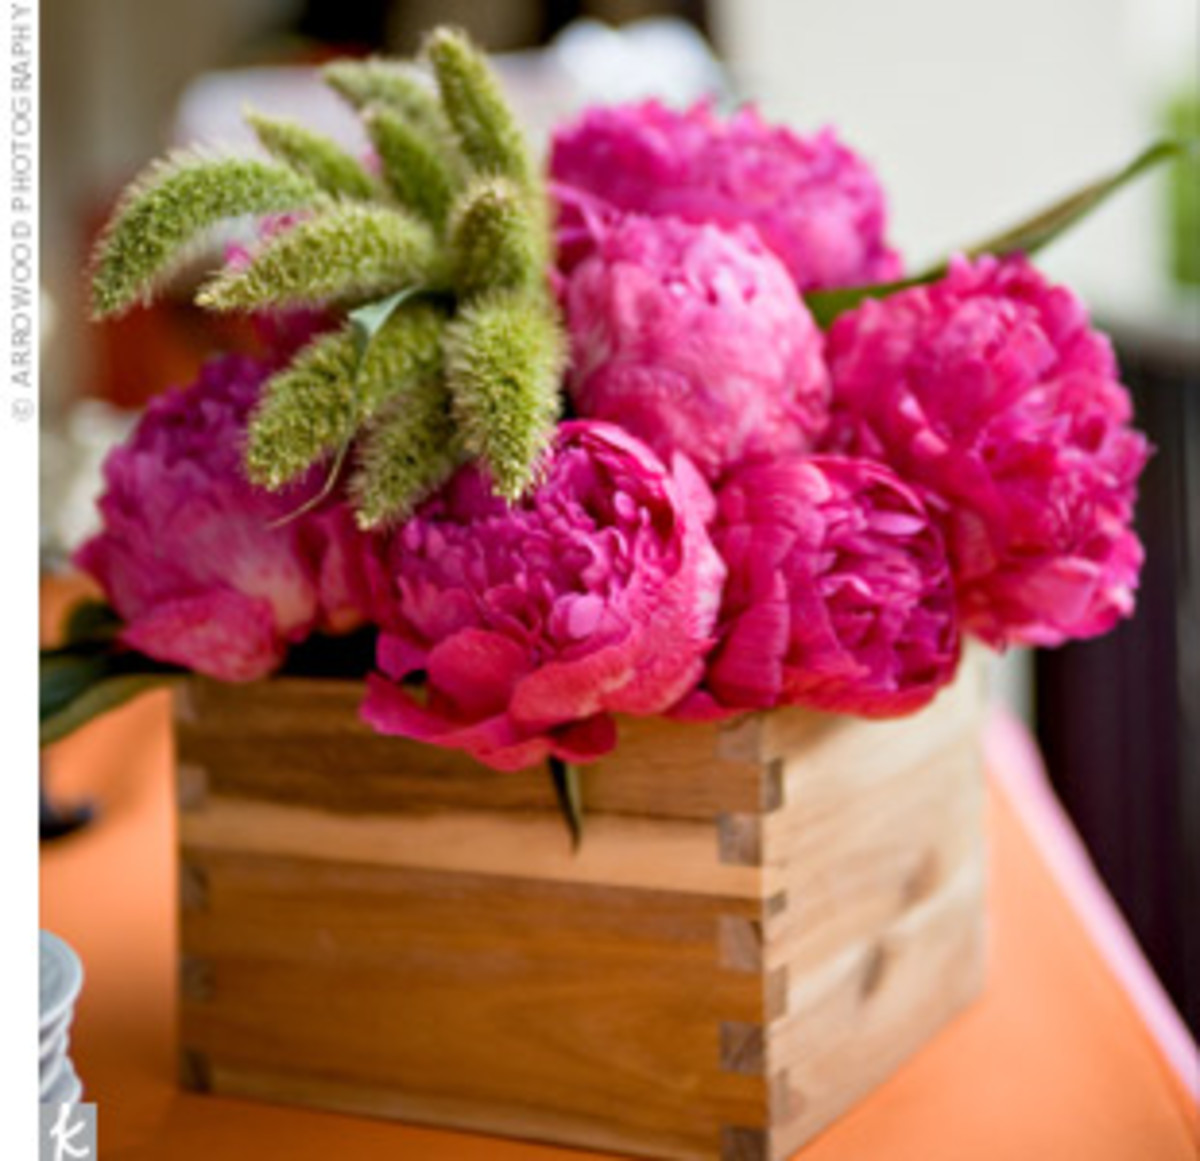 A wooden box provides a unique vessel for this very easy to make peony and millet centerpiece sent in by a real bride to the Knot.